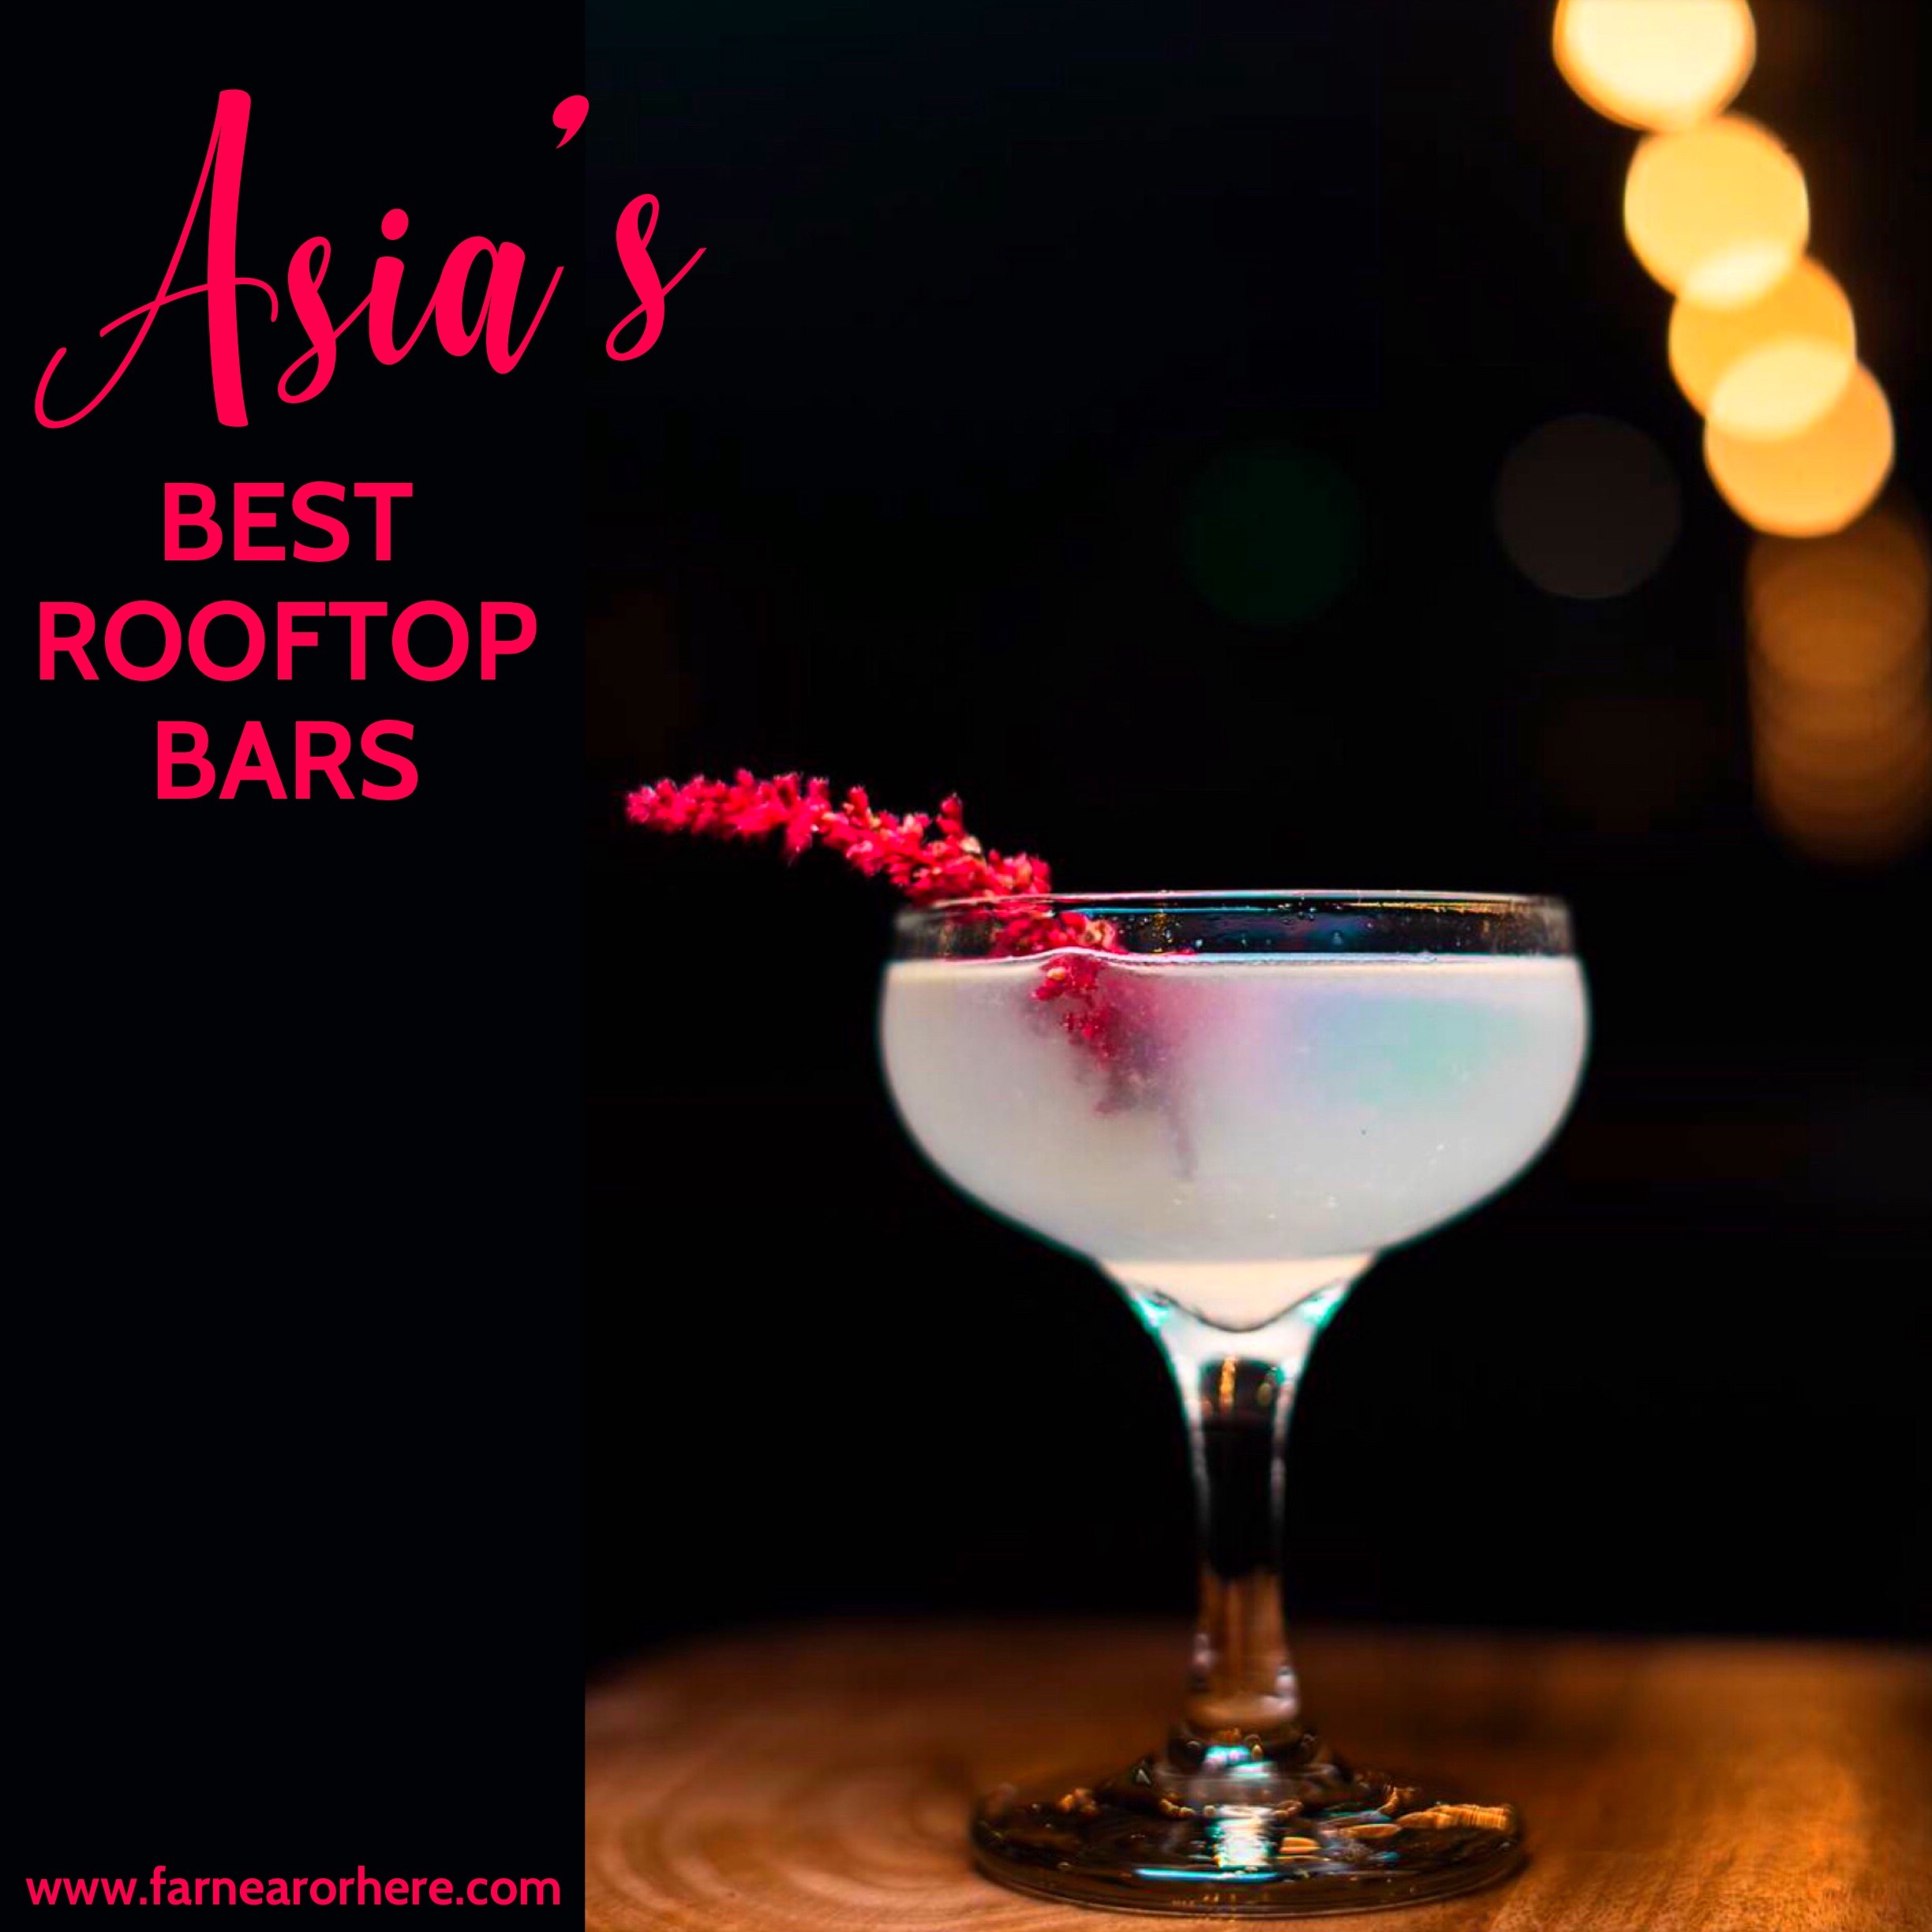 Indulge at Asia's best rooftop bars ...